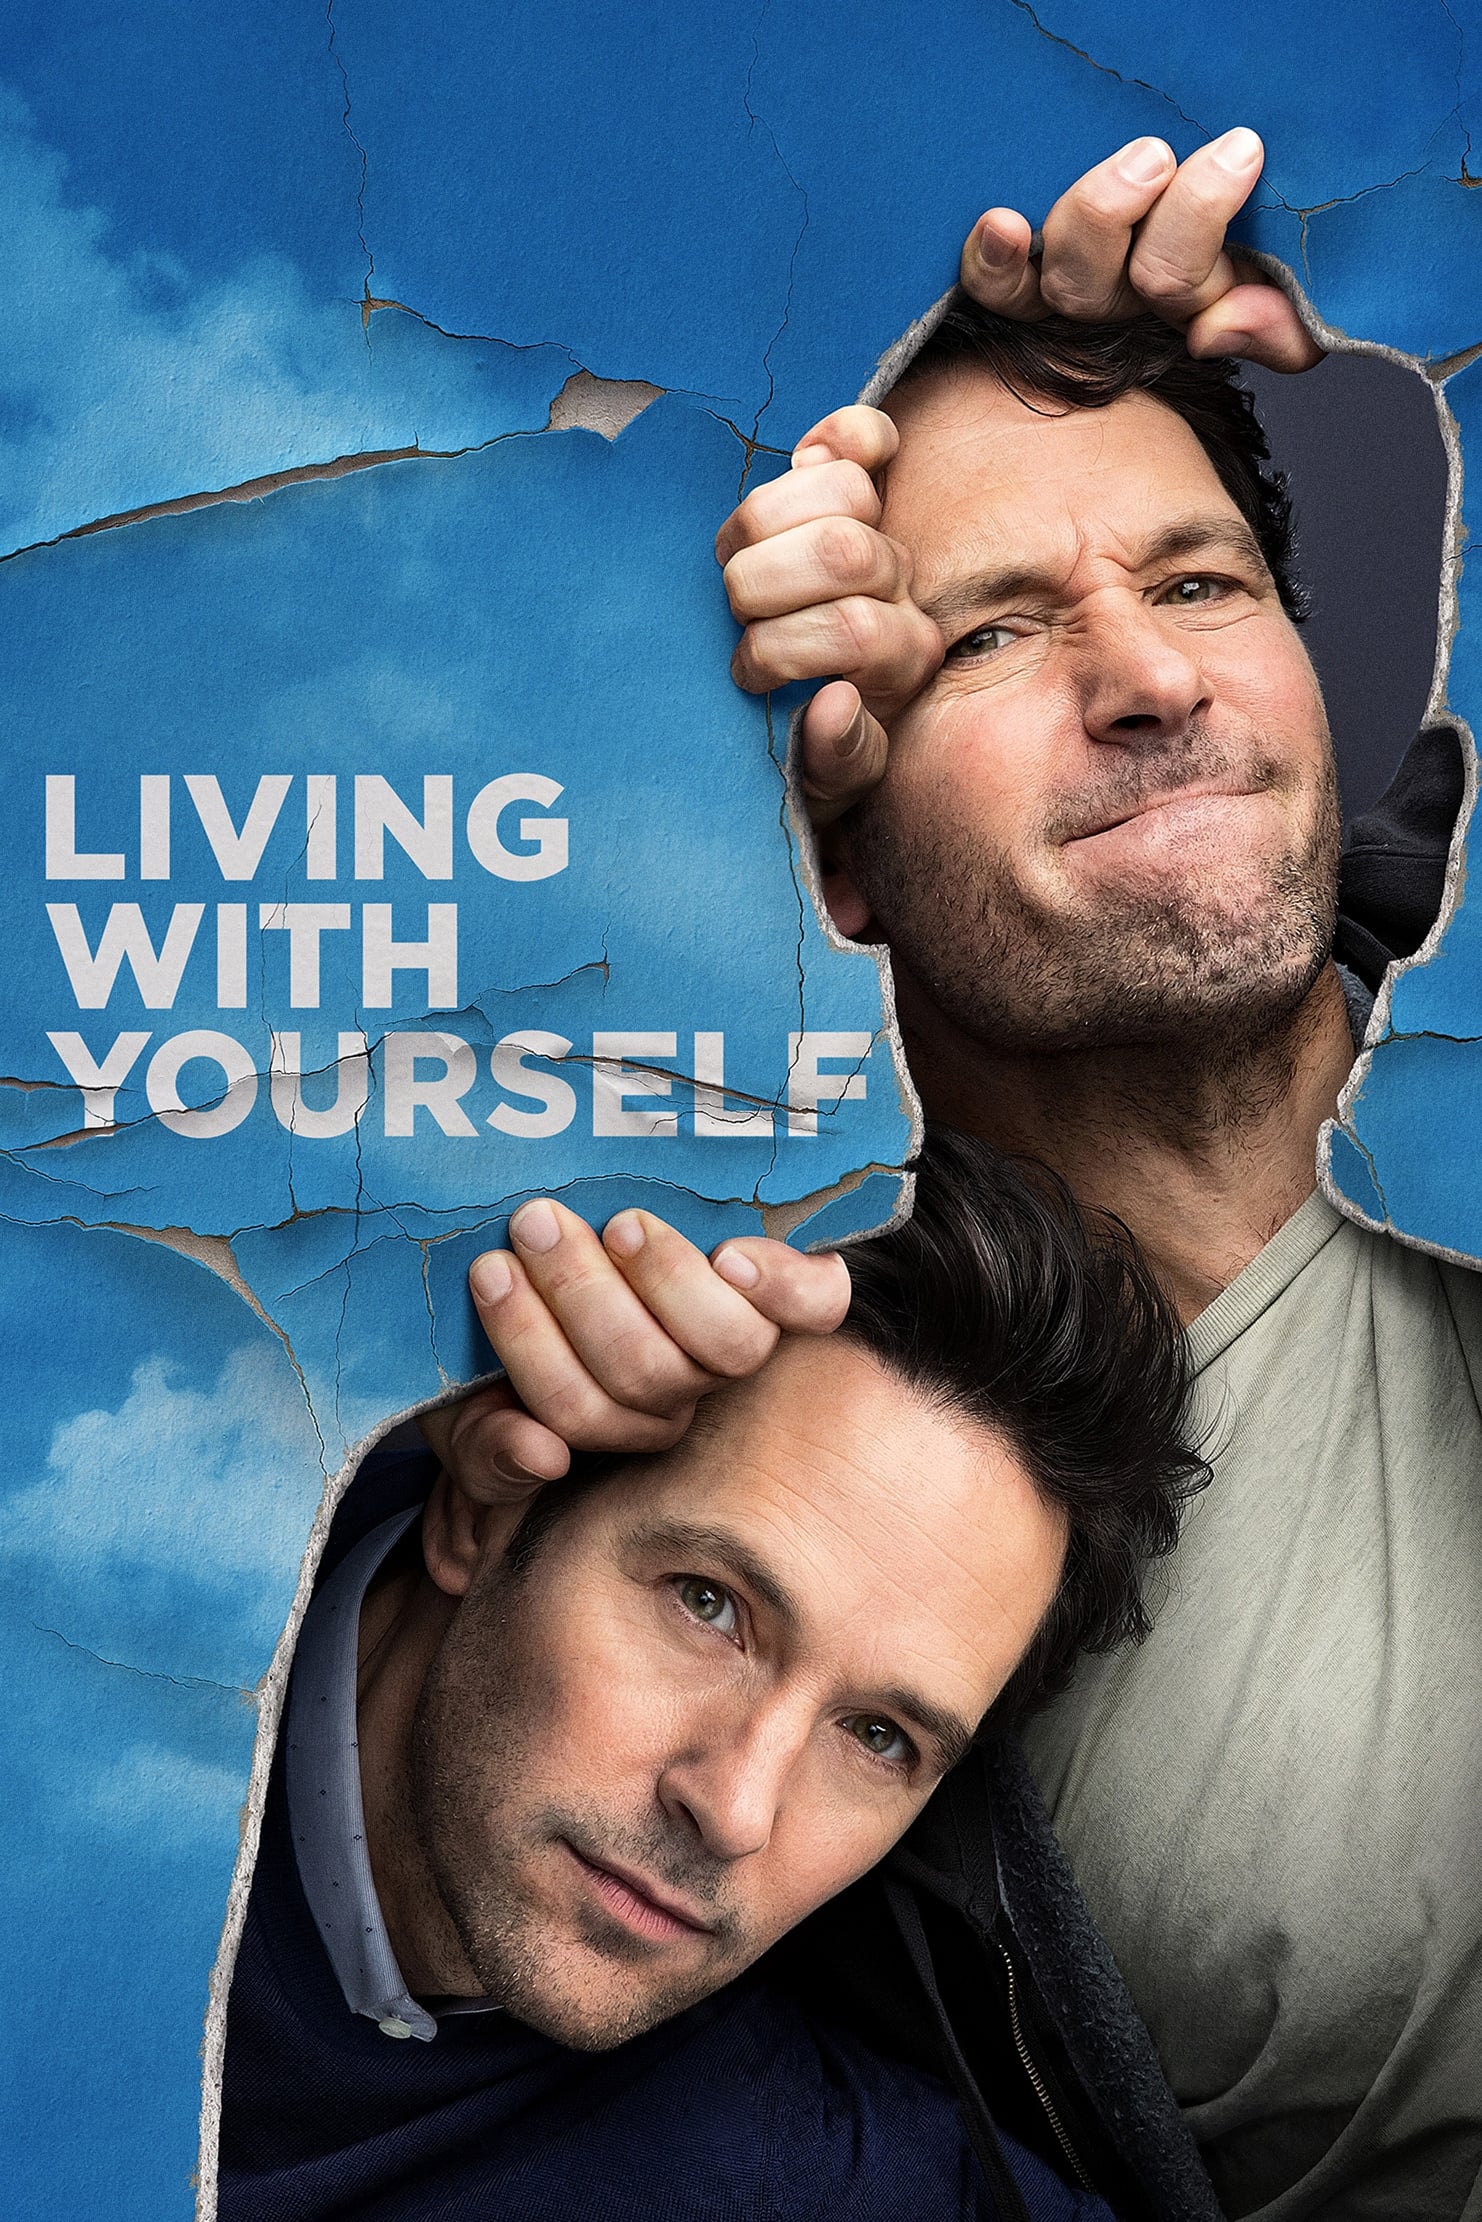 Living with Yourself (2019)